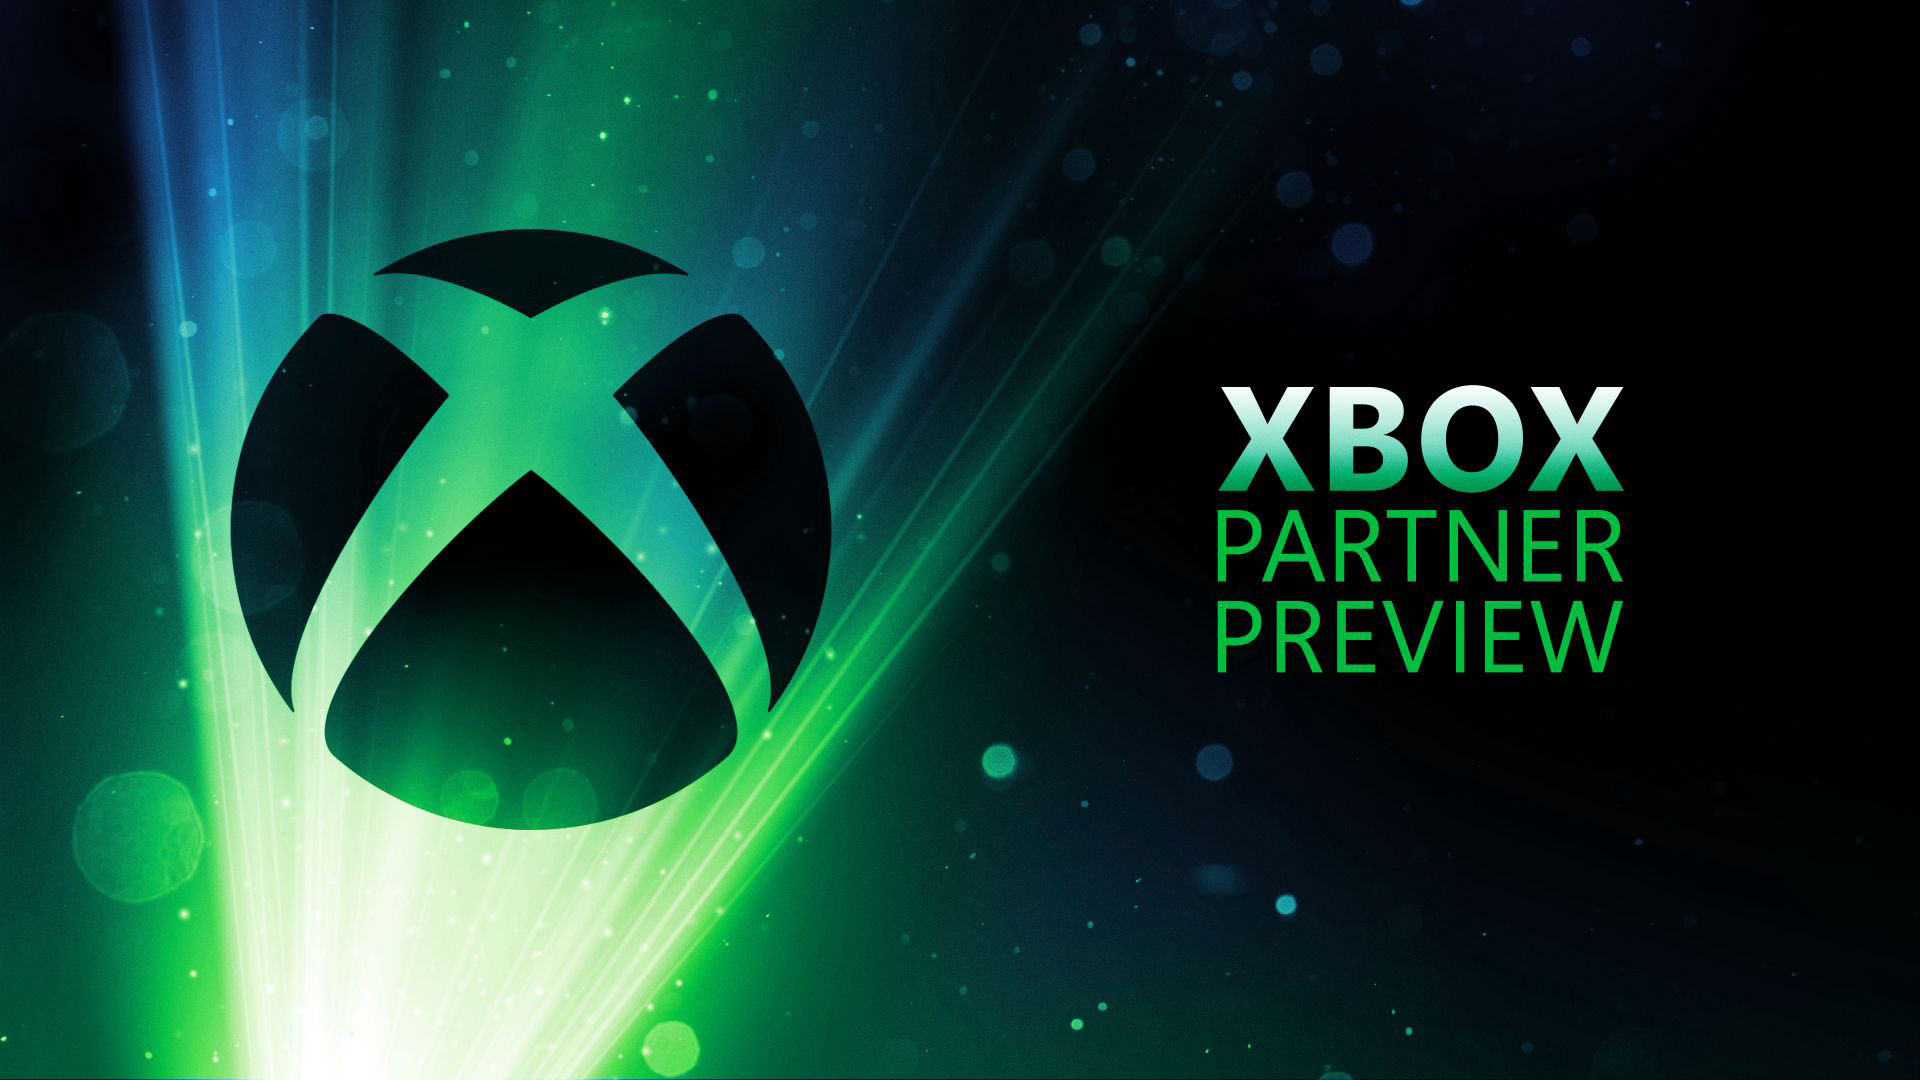 The next Xbox Partner Preview will stream on October 25 at 10:00am Pacific / 1:00pm Eastern